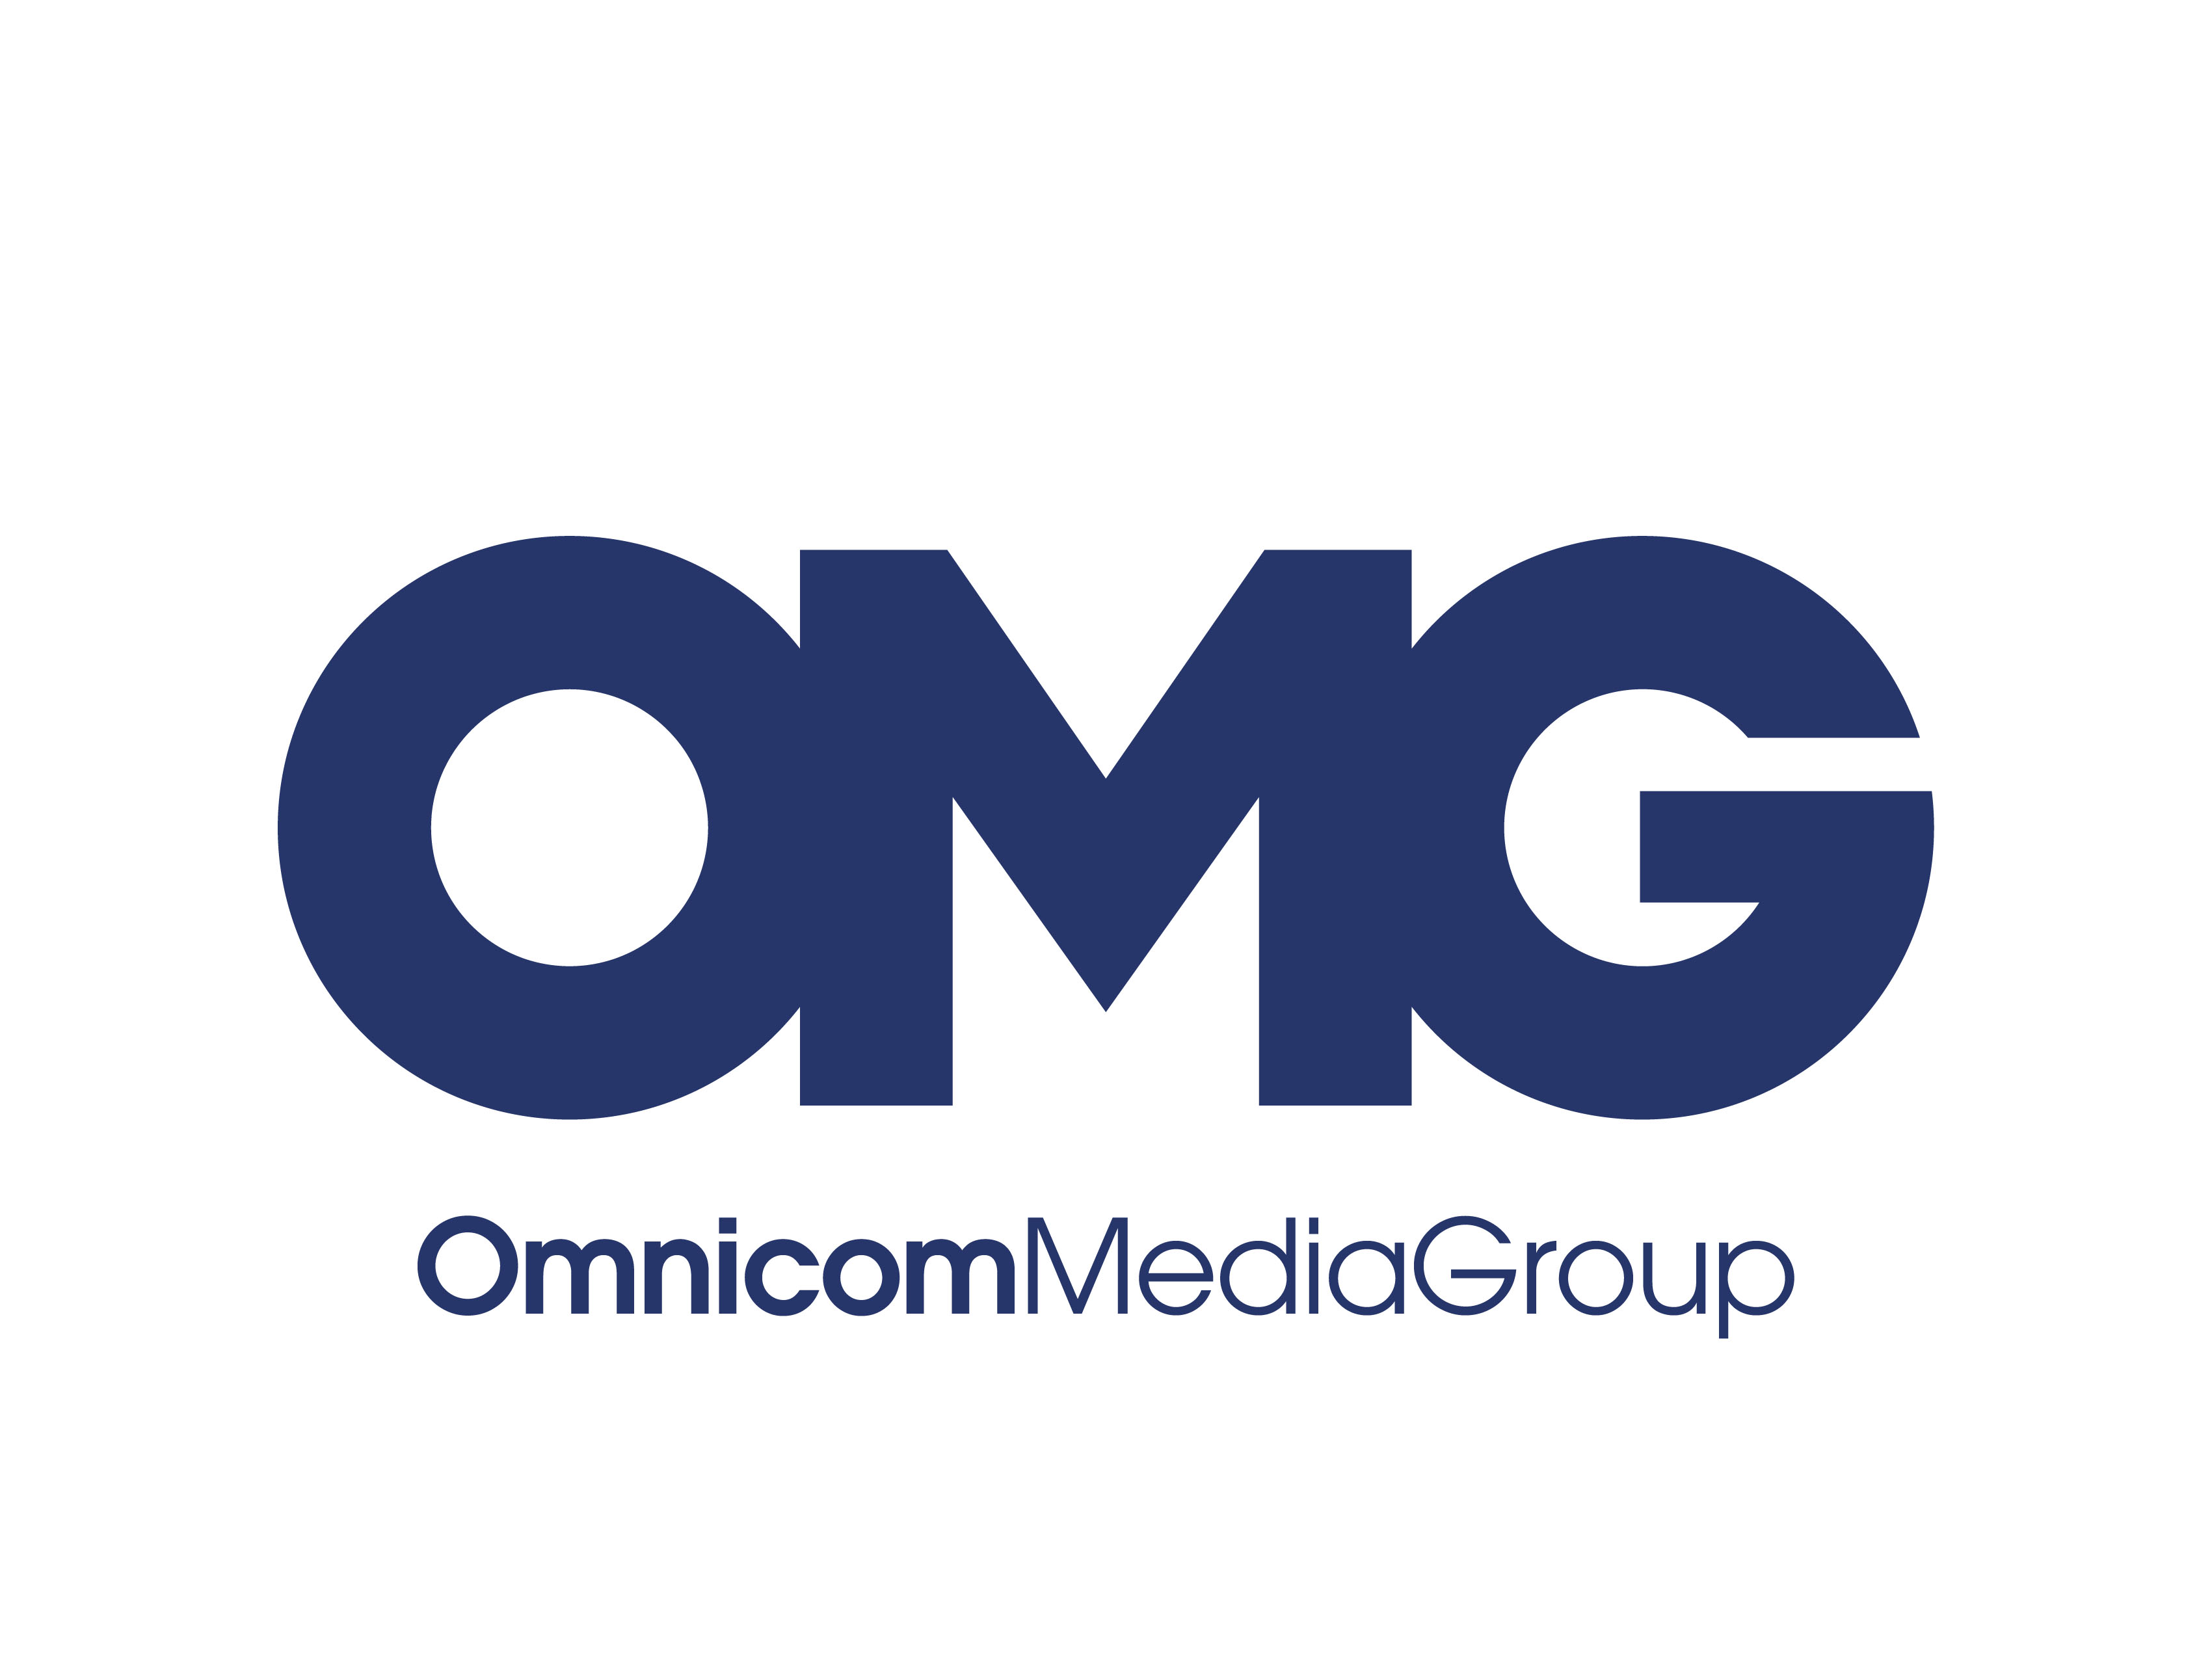 OMG ranked #1 for 2022 incremental billings growth among global media management groups  